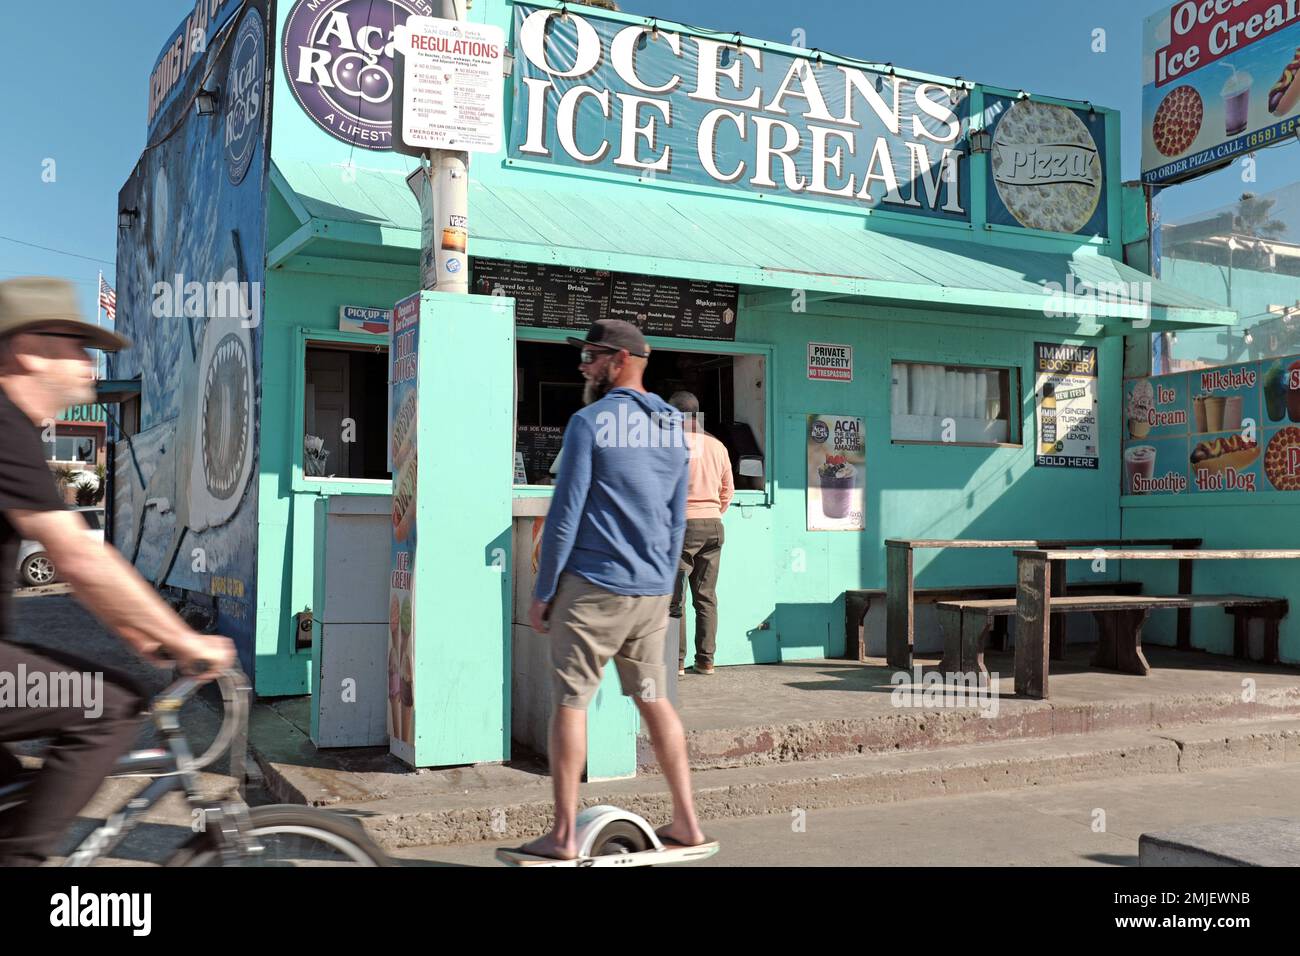 Sunny November day at Oceanside Ice Cream located on the boardwalk in Oceanside, California. Stock Photo